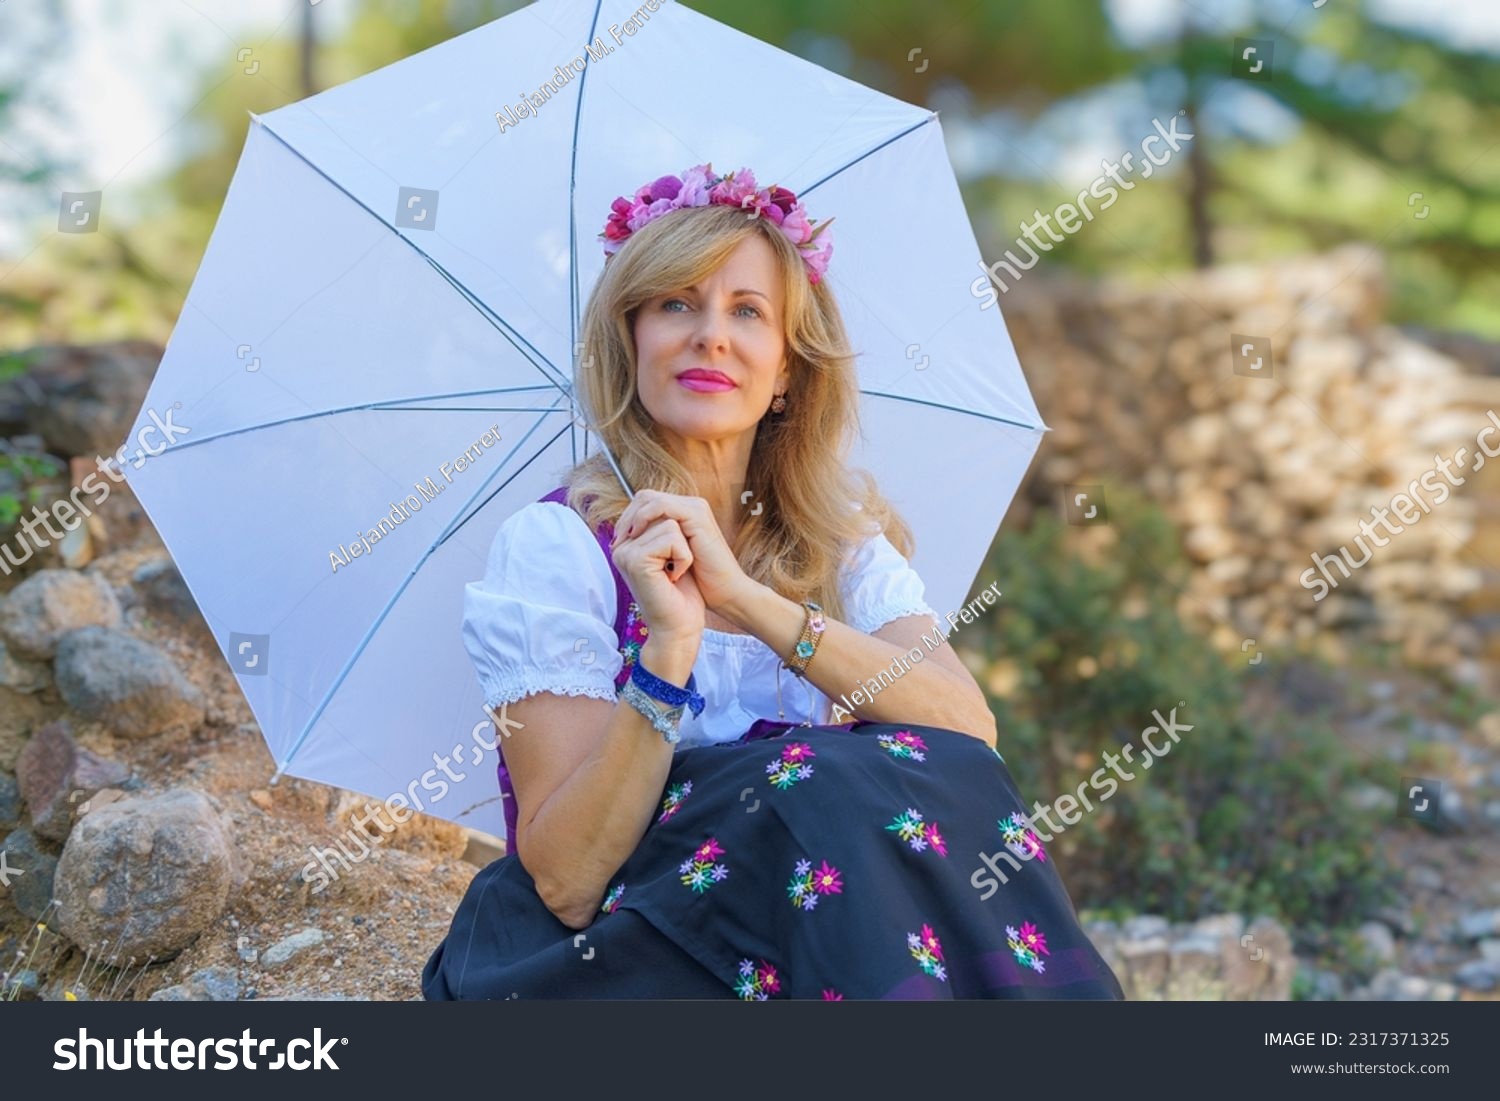 Beautiful woman in typical Austrian costume holds an umbrella on a sunny spring day. #2317371325